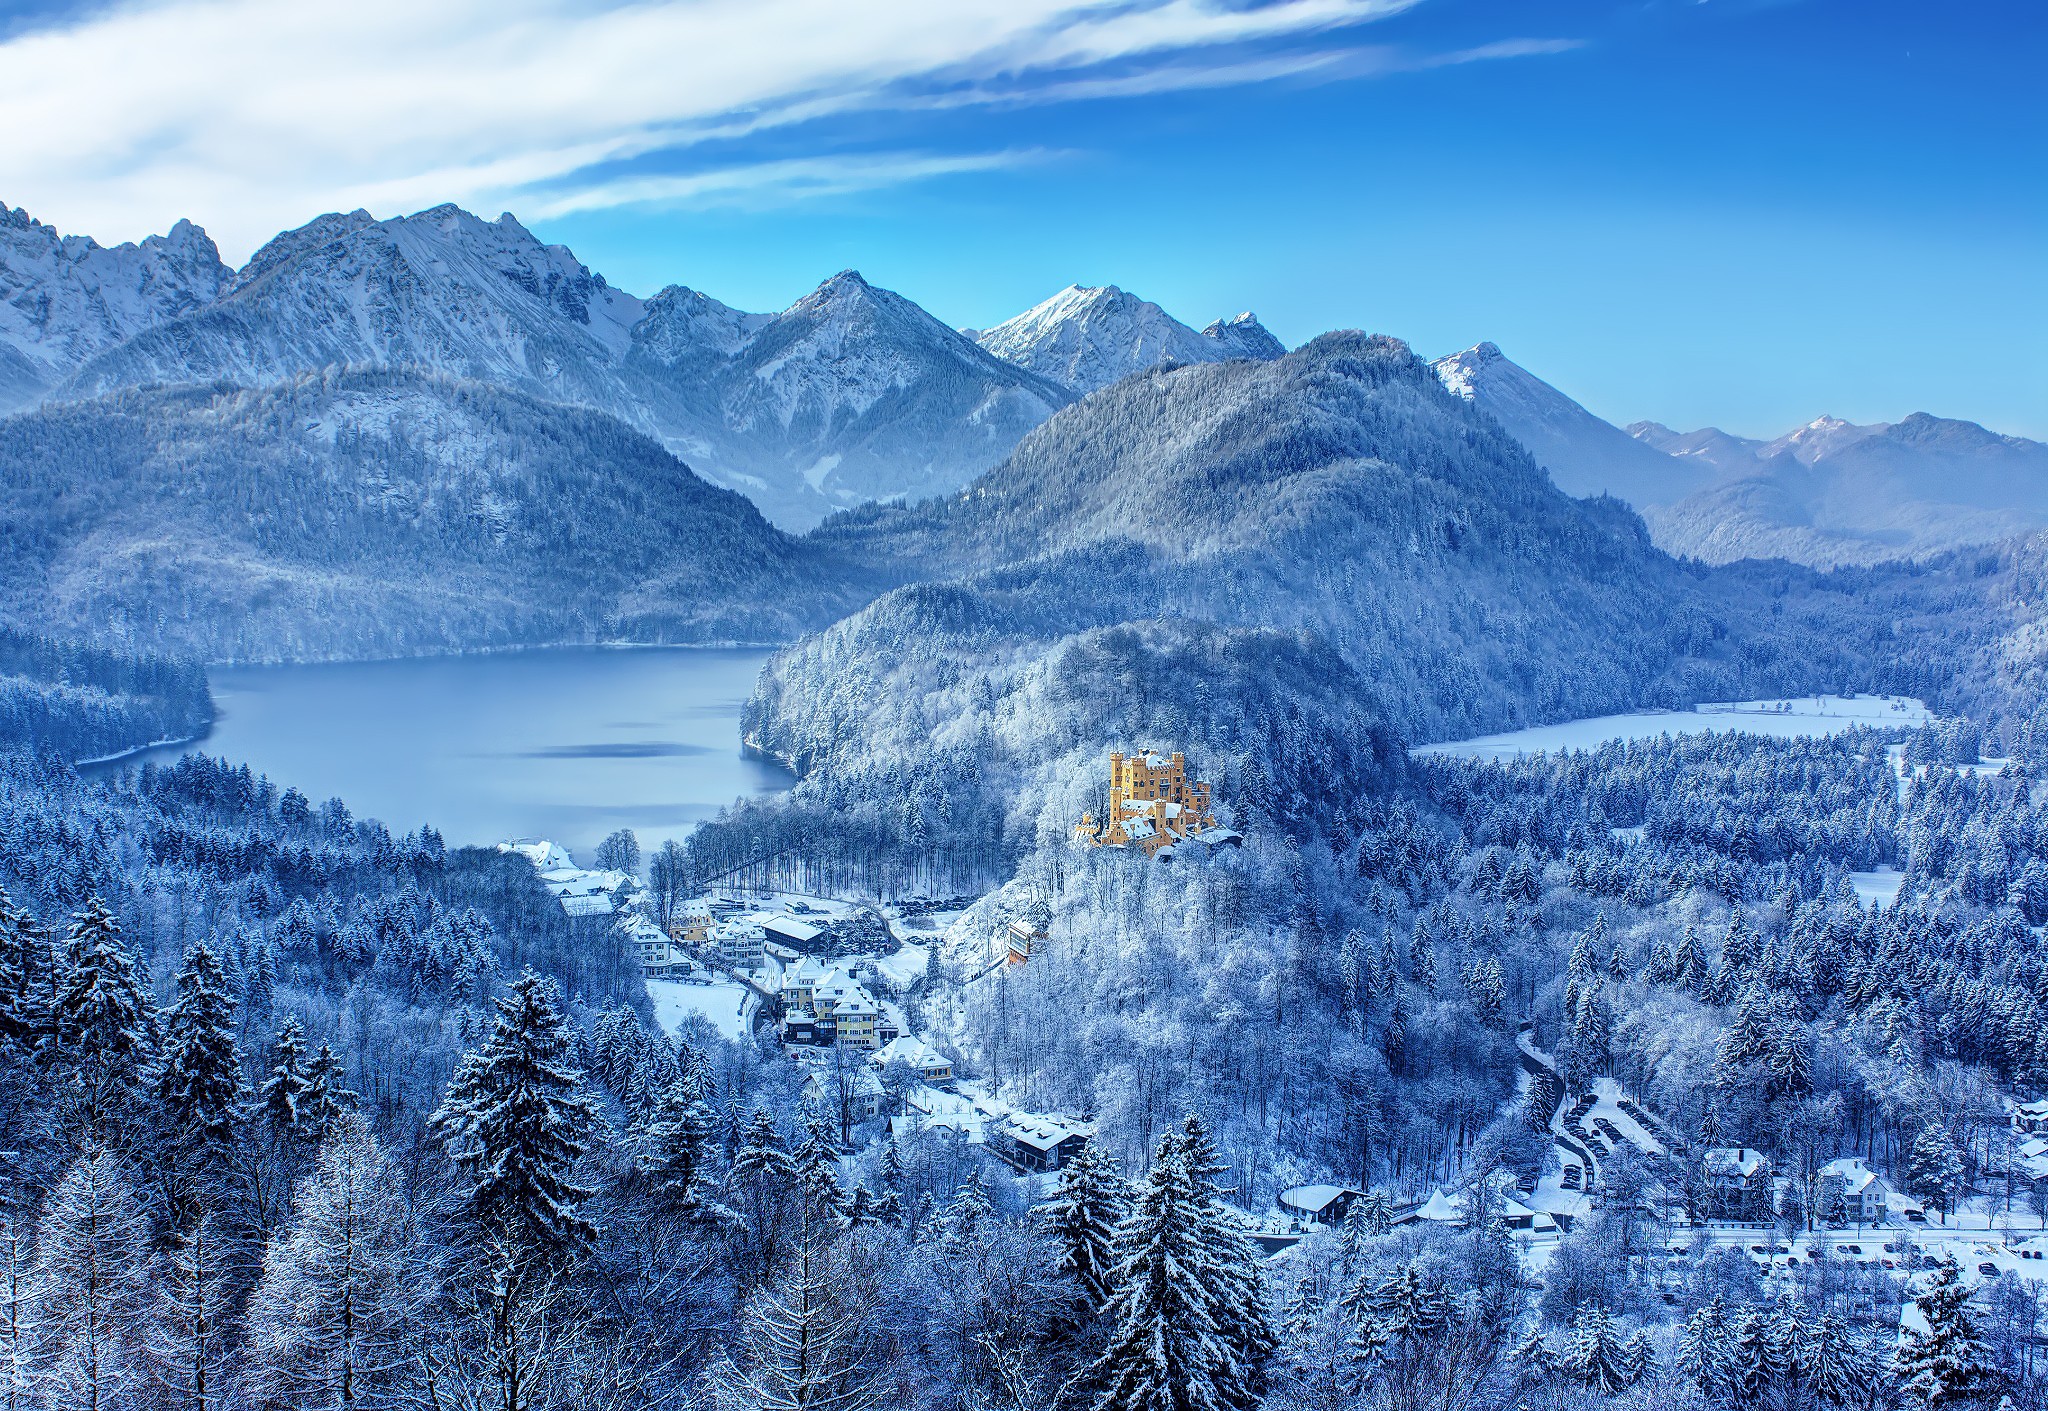 General 2048x1411 nature landscape mountains trees forest Germany winter snow castle house lake clouds